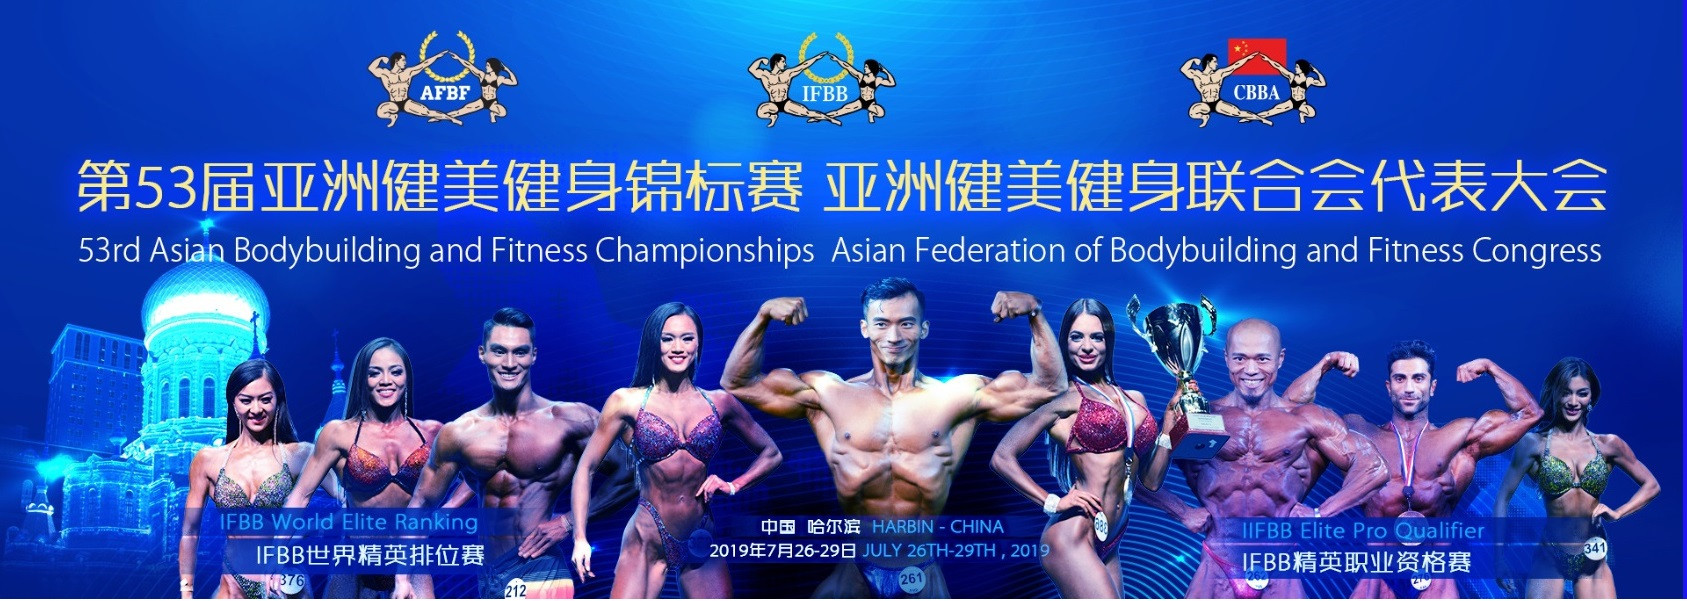 Harbin ready to host Asian Bodybuilding and Fitness Championships